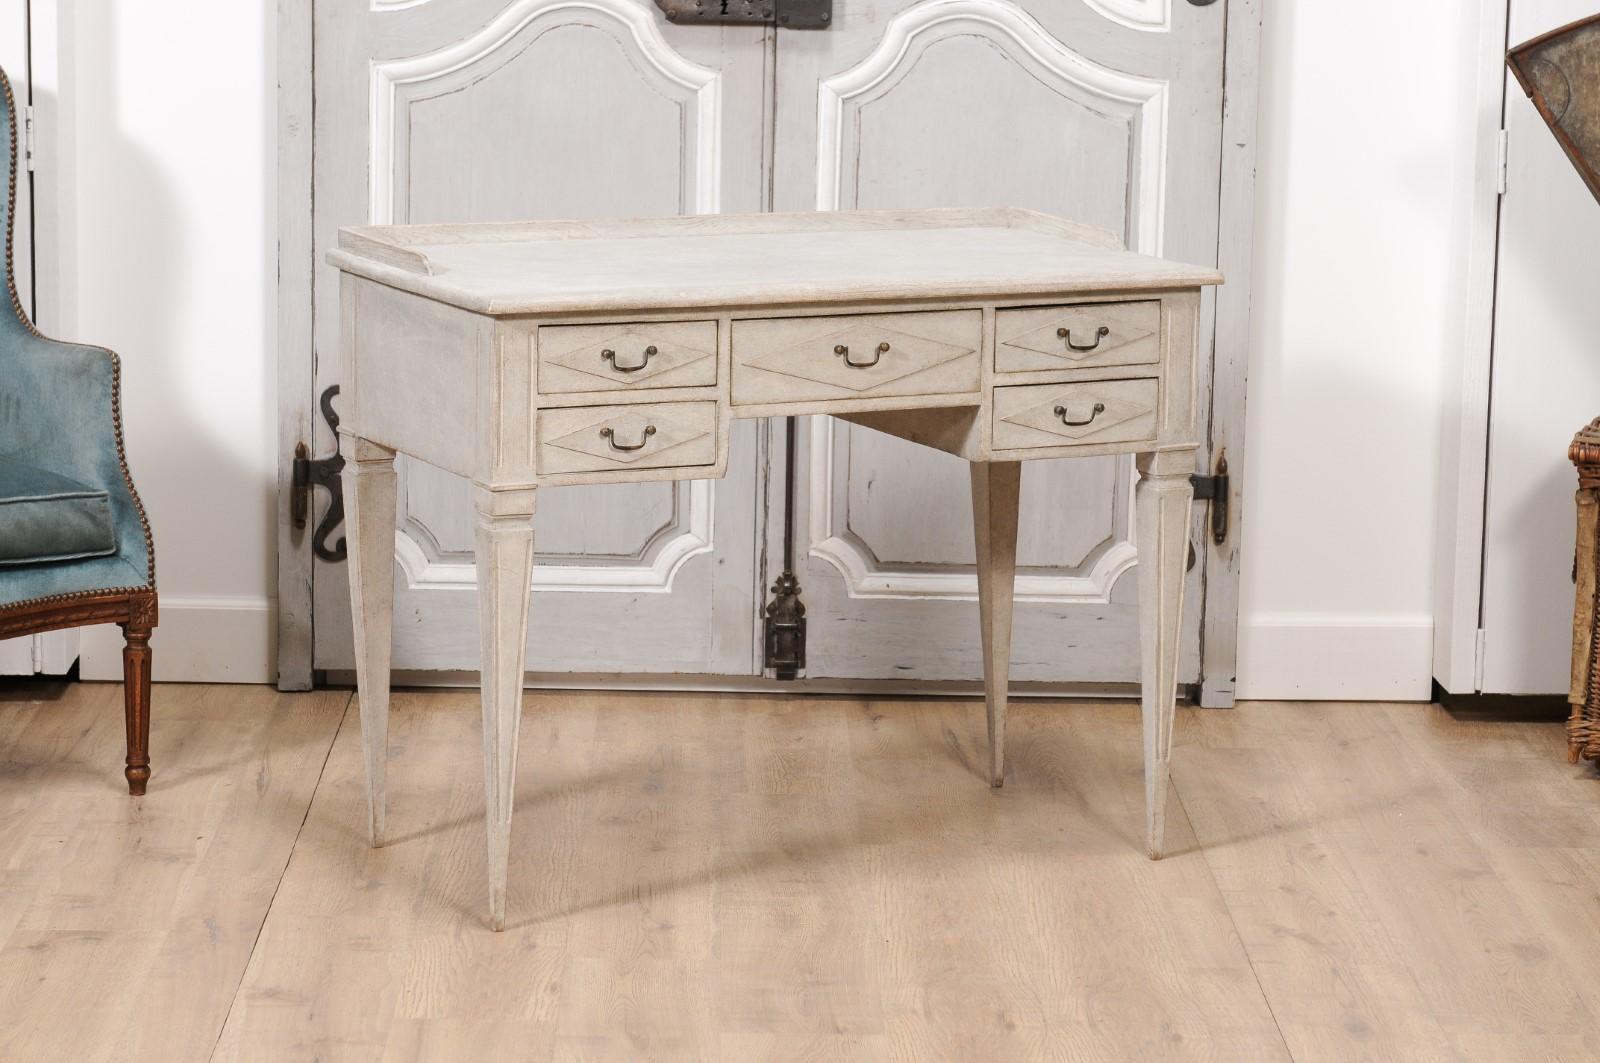 A Swedish Gustavian style painted wood writing table from circa 1880 with five drawers, carved diamond motifs, fluted tapering legs and slightly raised back. Exuding an elegant simplicity typical of Scandinavian design, this Swedish Gustavian style